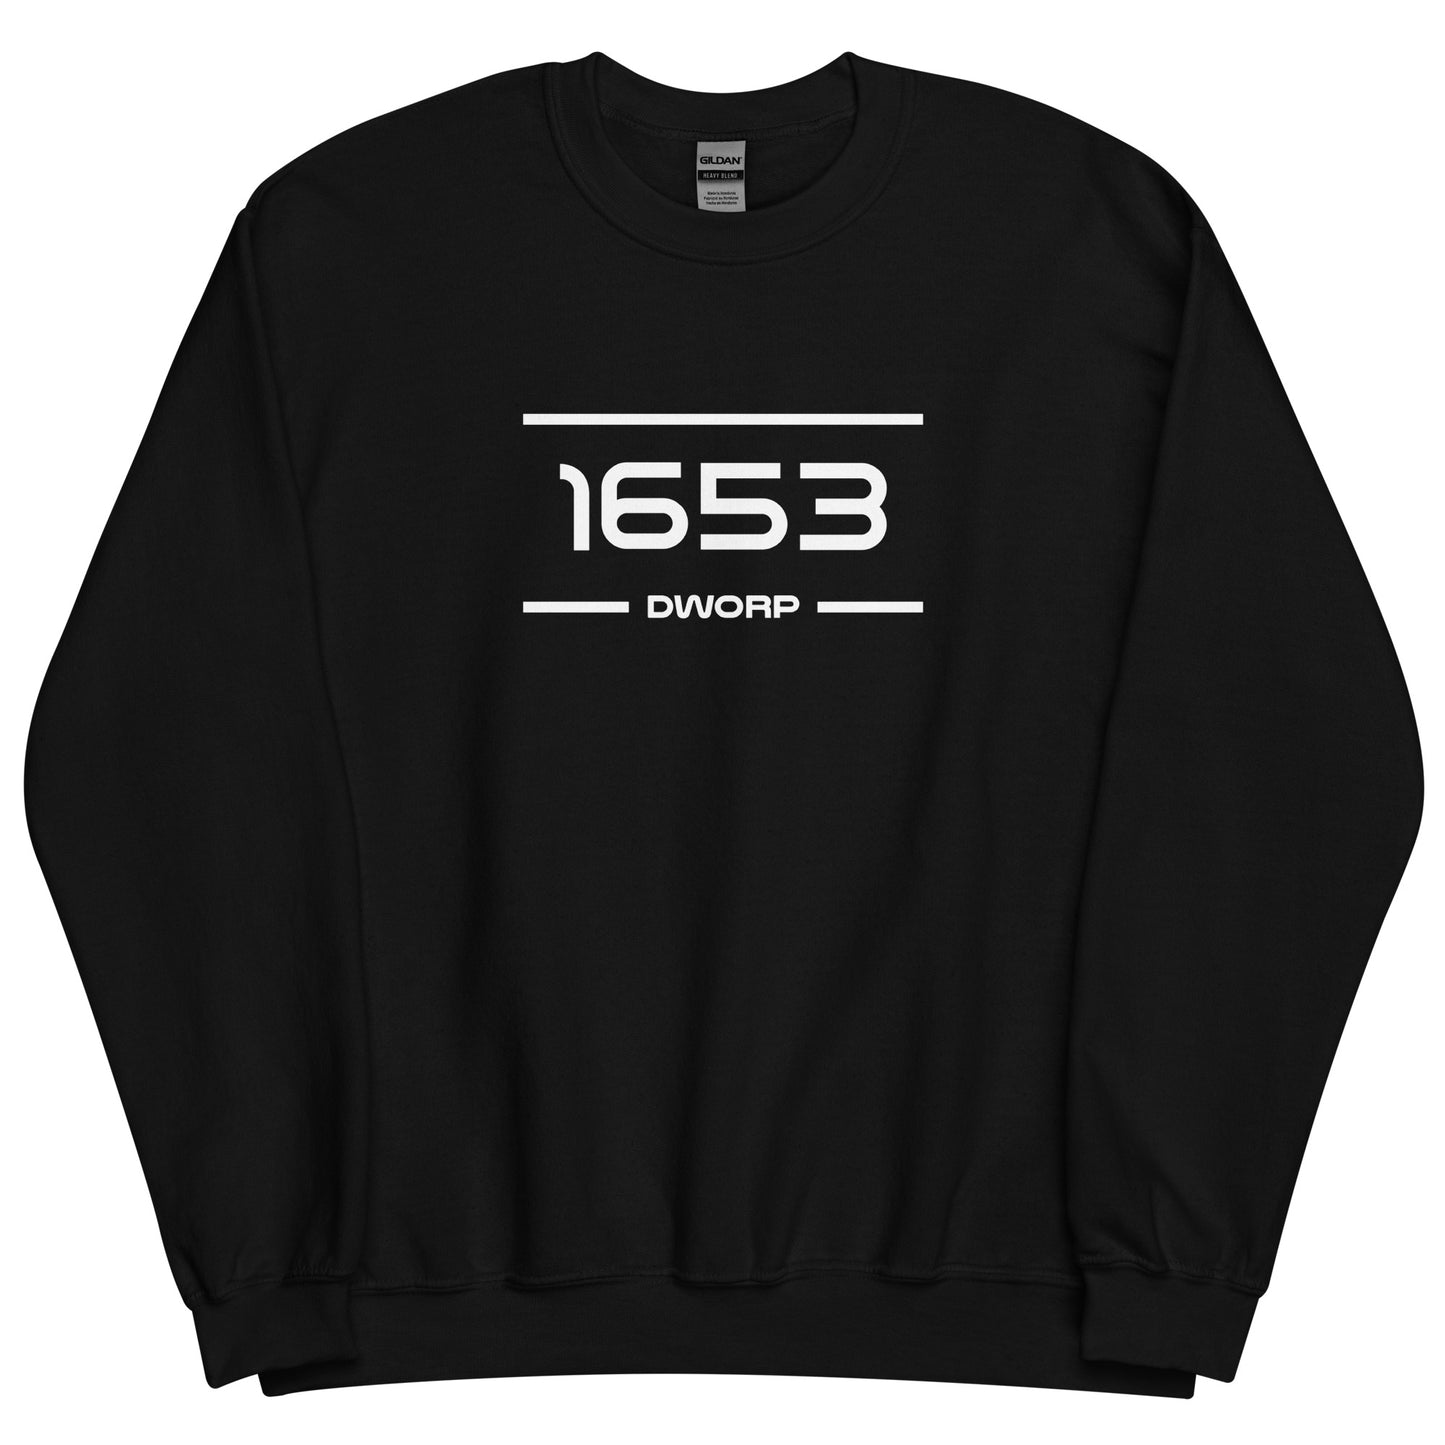 Sweater - 1653 - Dworp (M/V)